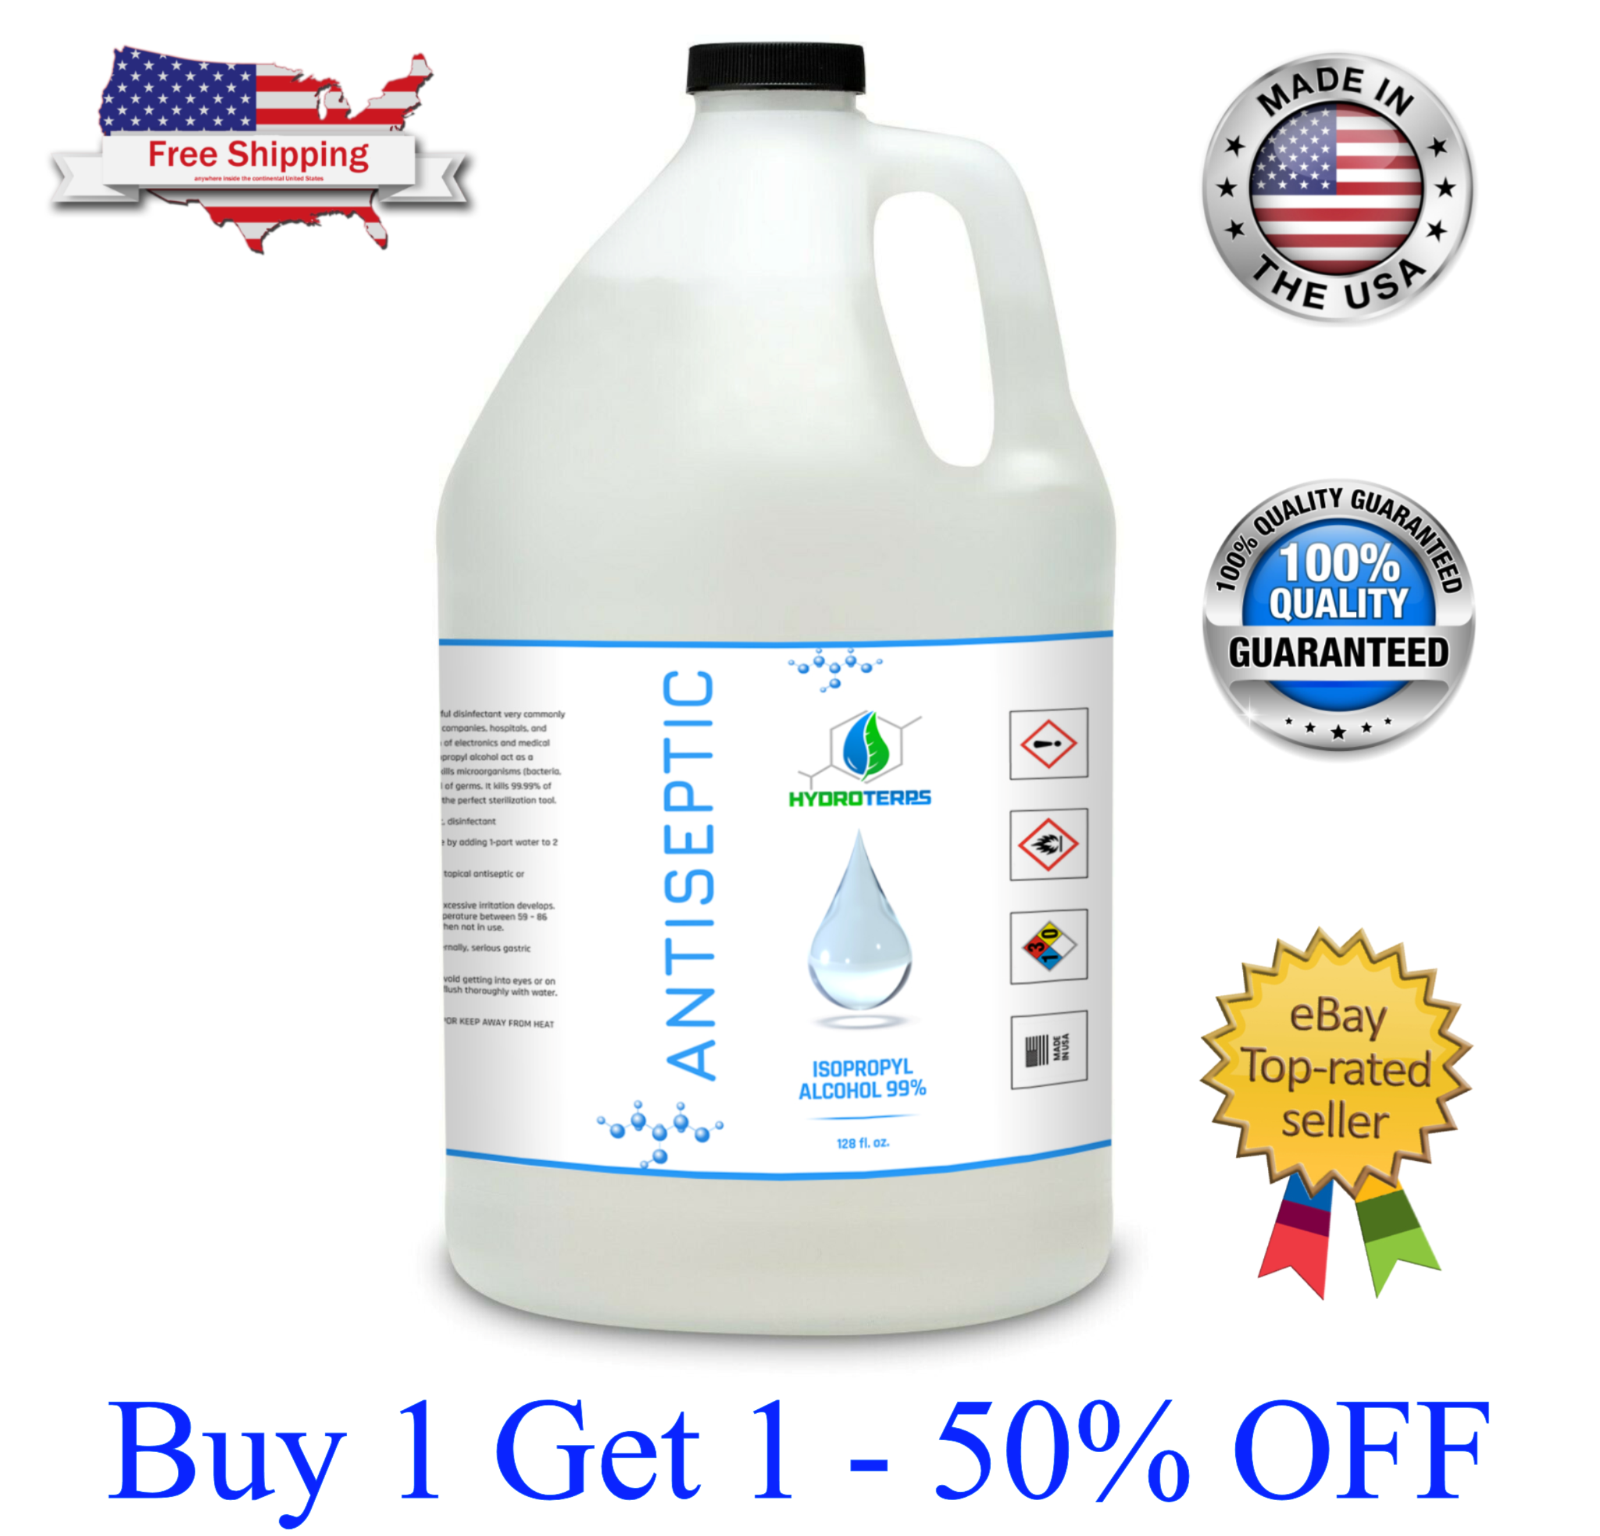 Isopropyl Alcohol 99% 1 Gallon For Sanitizing And Disinfecting Rubbing Alcohol